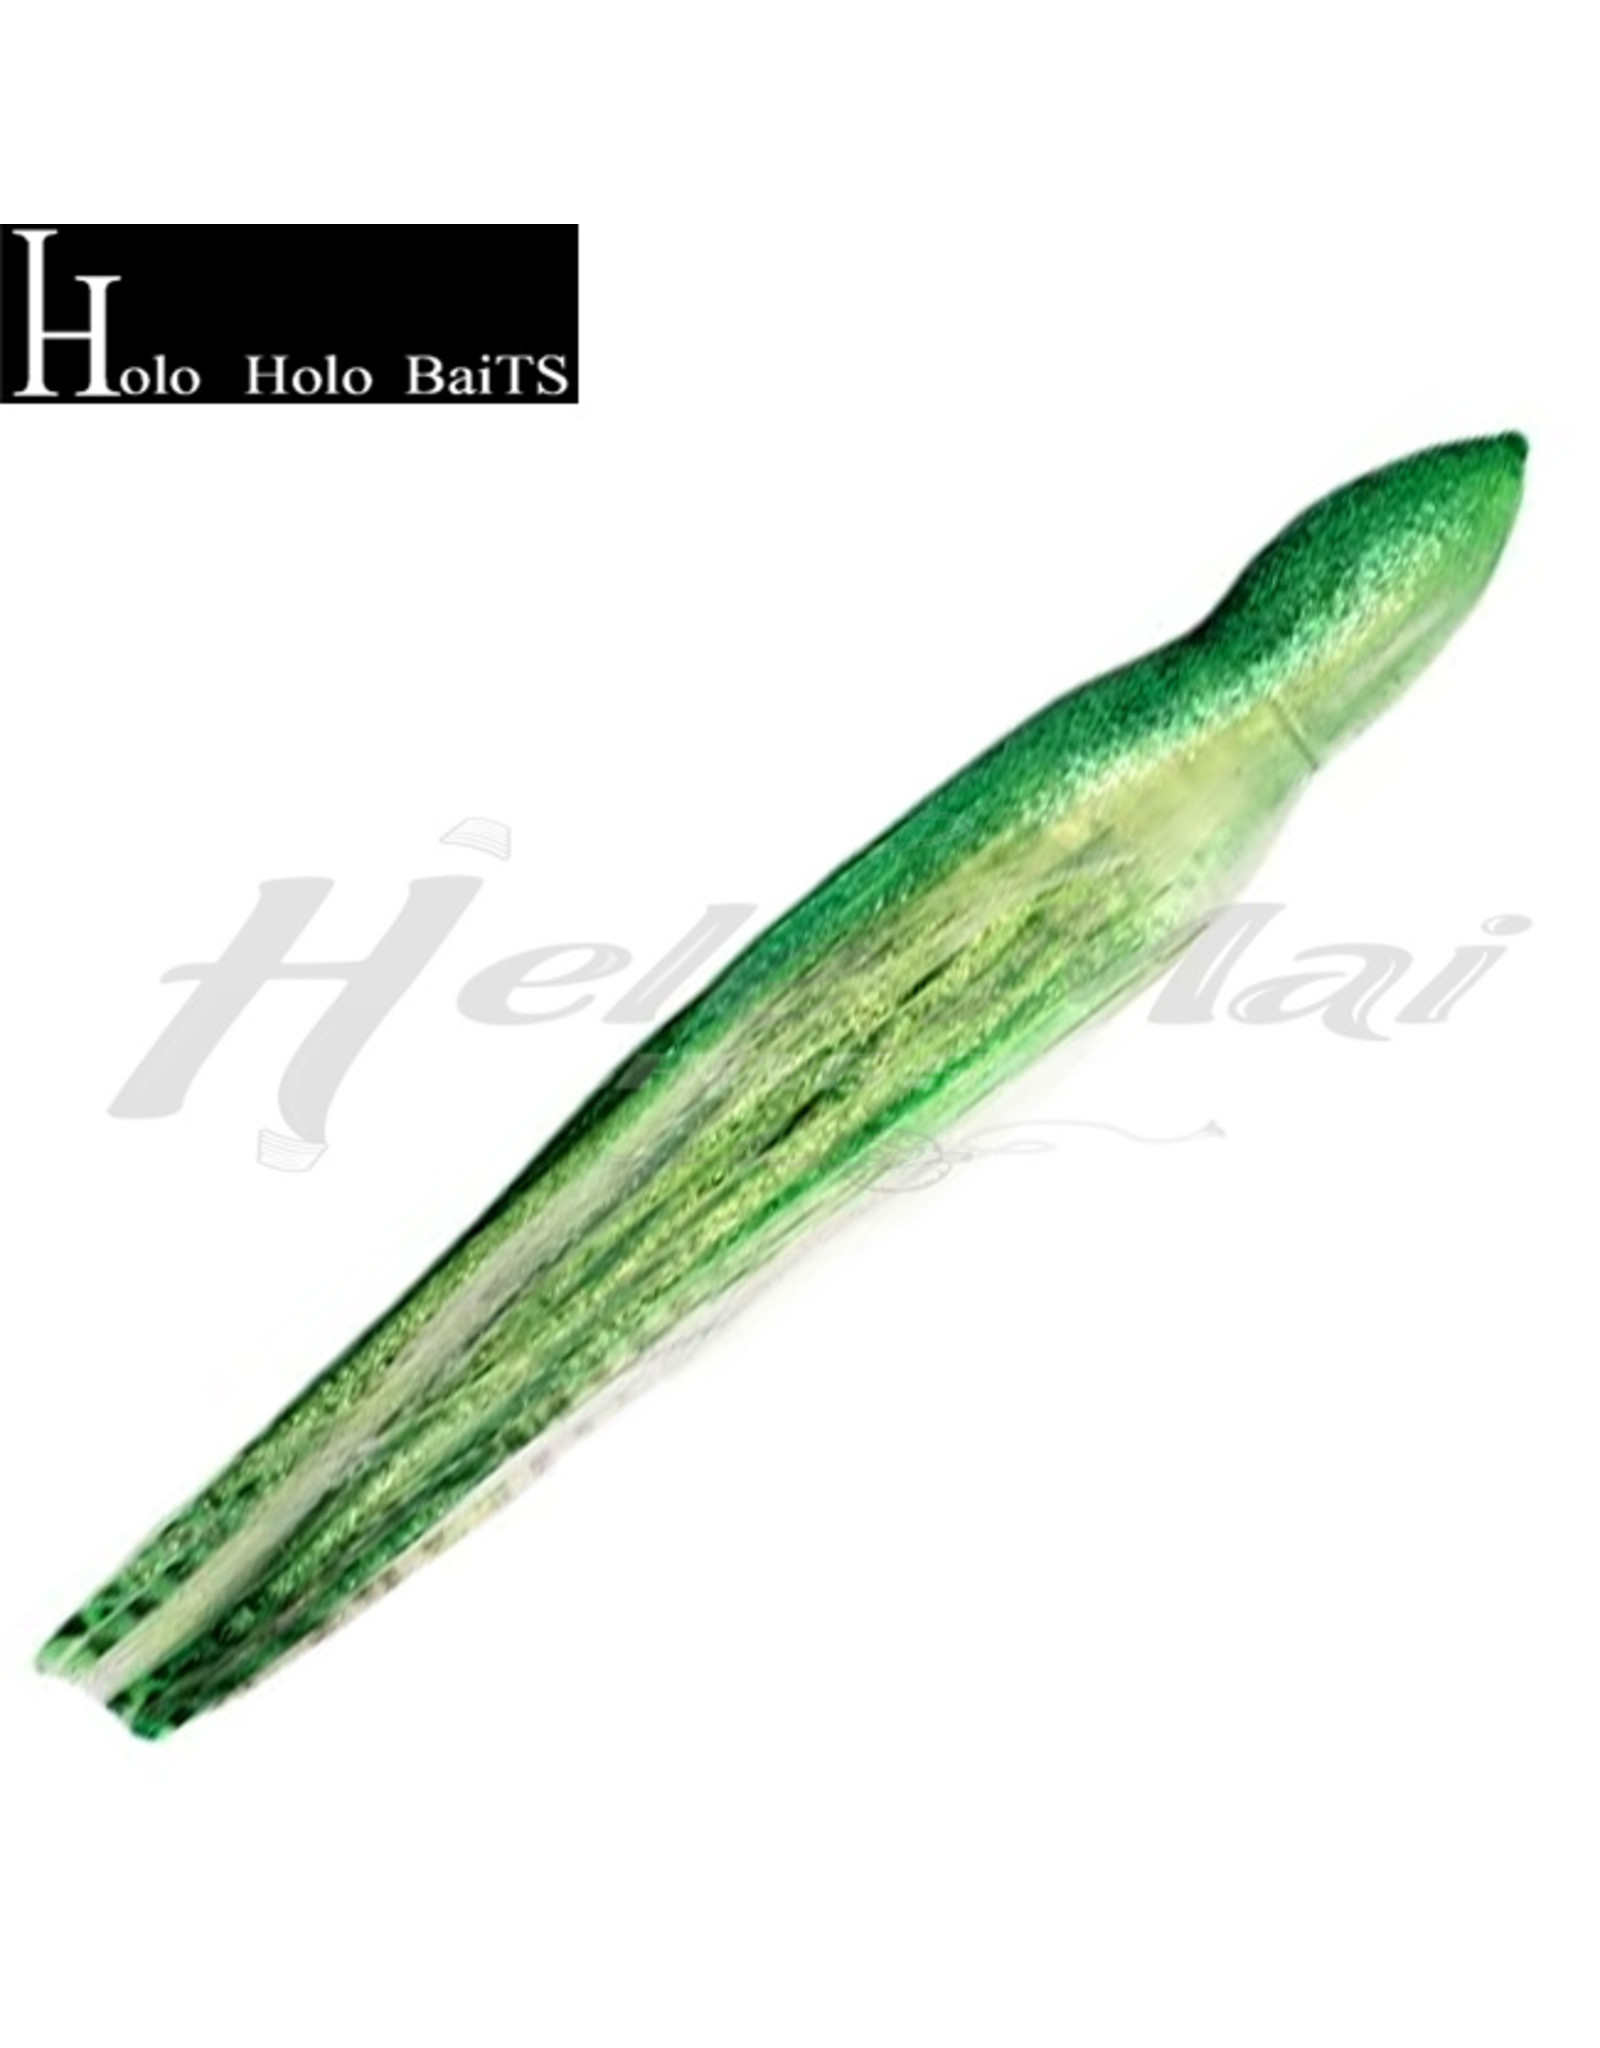 HOLO HOLO Squid Skirt, 9" Green Silver Dots, 0639